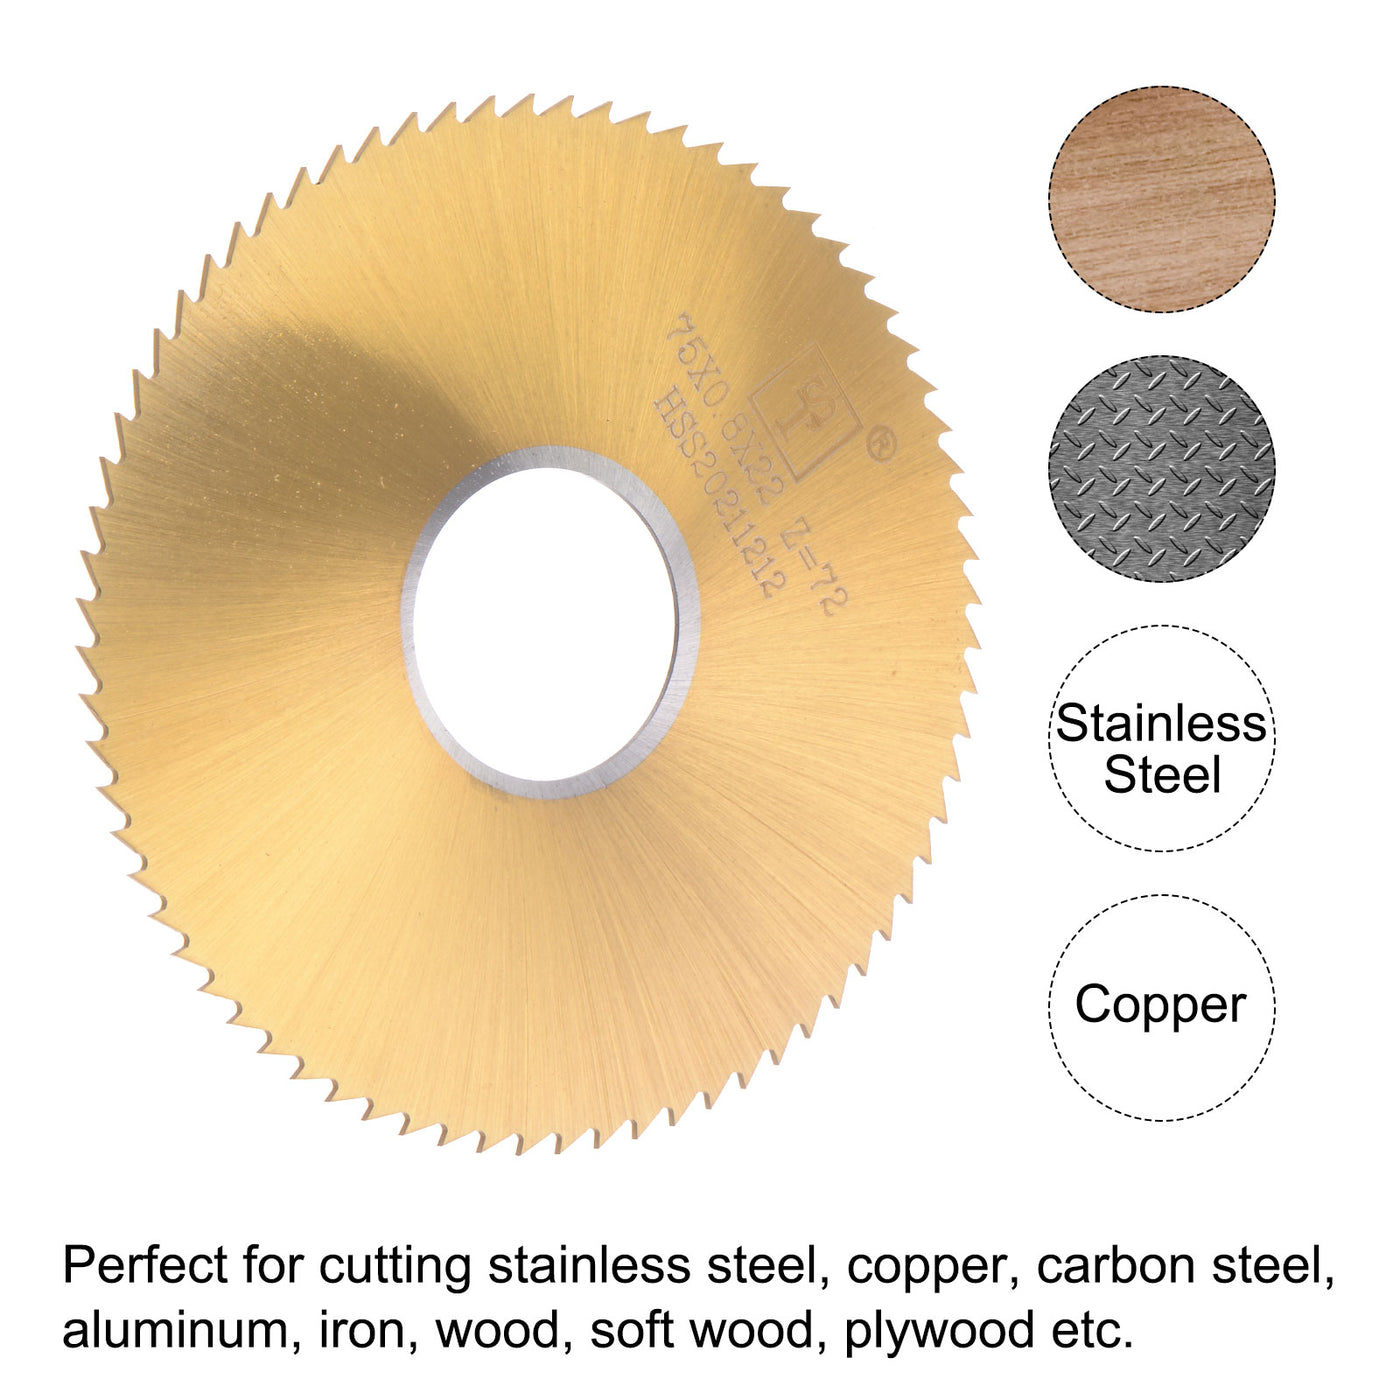 Uxcell Uxcell 75mm Dia 22mm Arbor 1.2mm Thick 72 Tooth Titanium Coated Circular Saw Blade